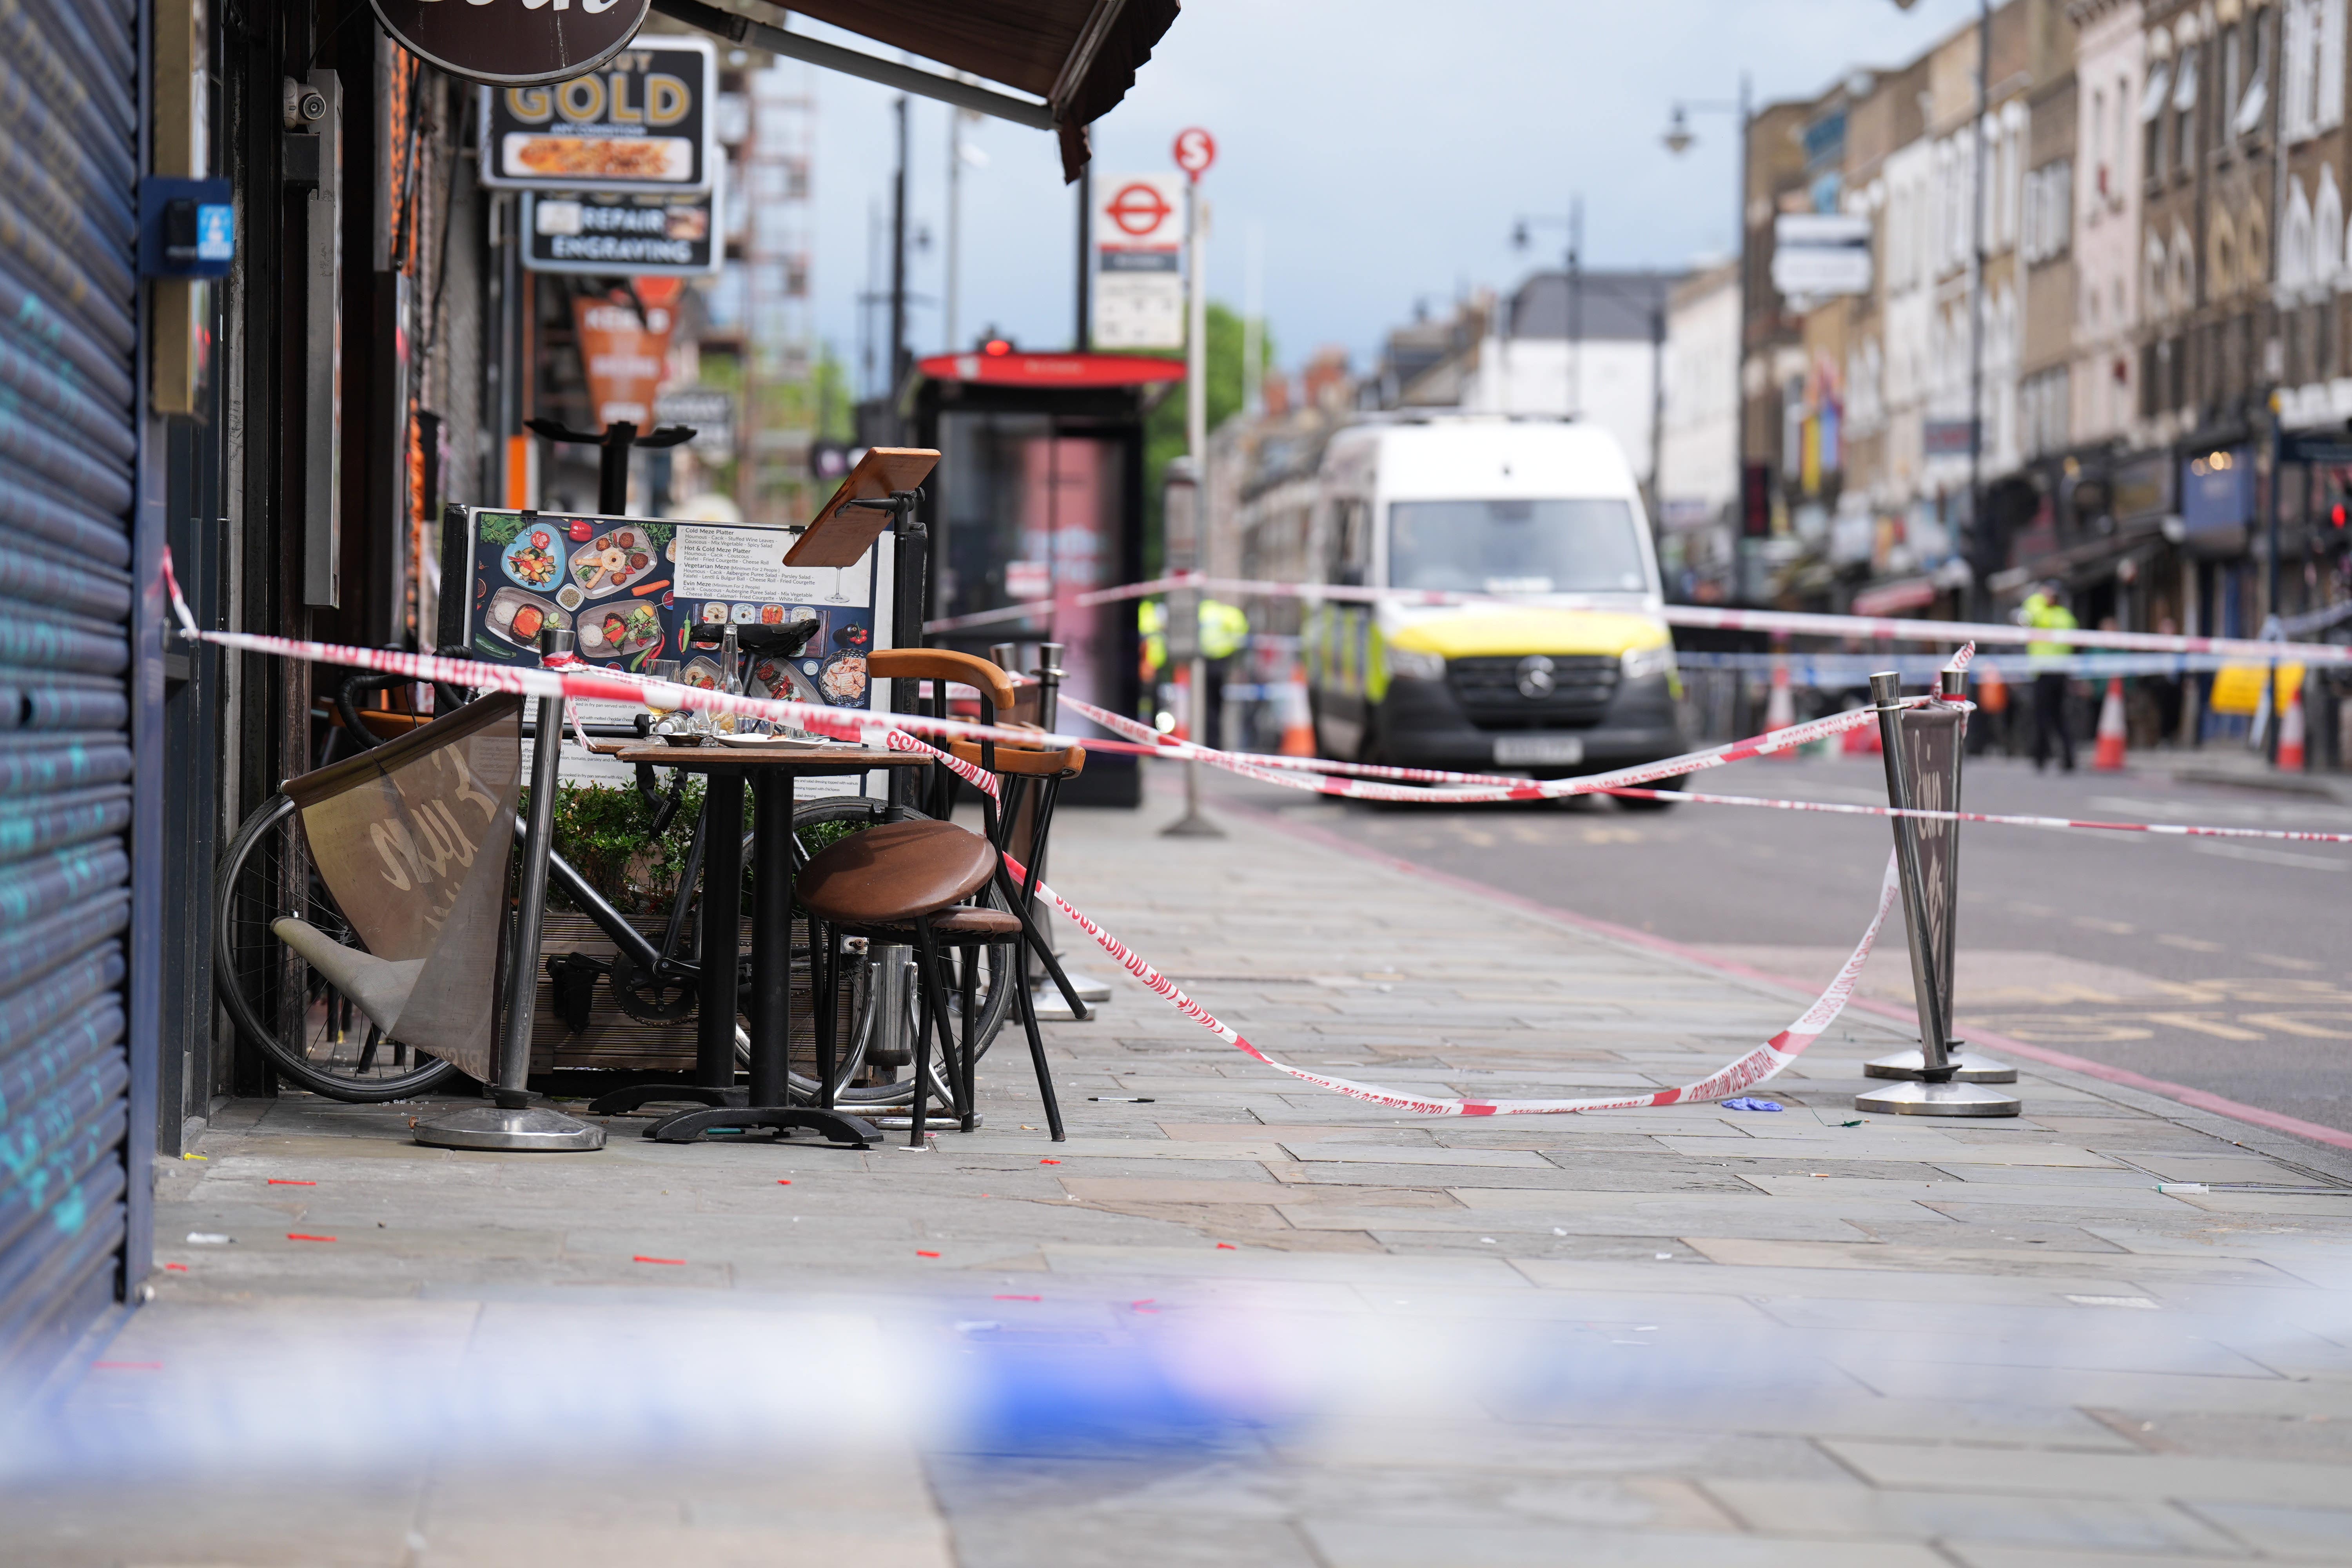 Police at the scene of a shooting at Kingsland High Street, Dalston, east London